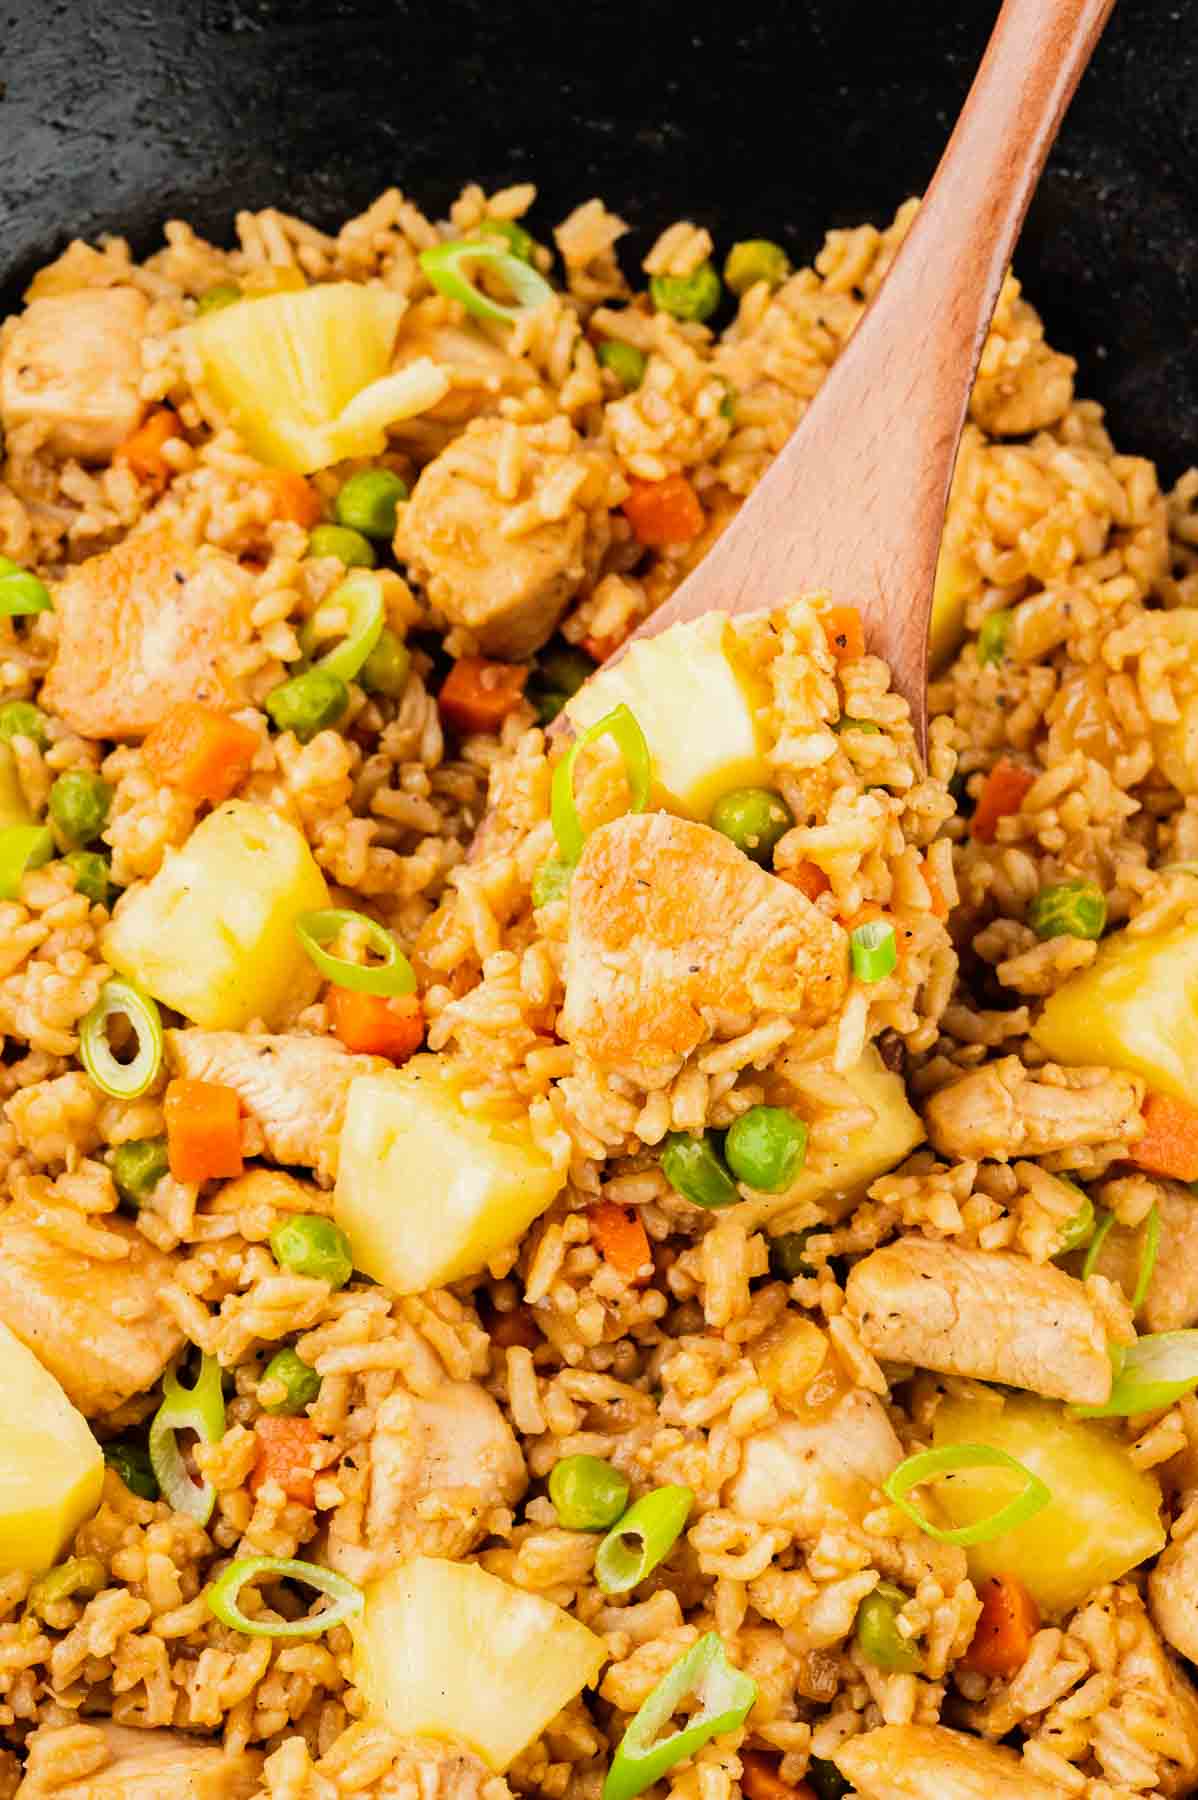 Pineapple Chicken Fried Rice is the perfect balance of sweet and savoury with pineapple chunks, diced chicken breast pieces and rice all seasoned with soy sauce, hoisin sauce and toasted sesame oil.